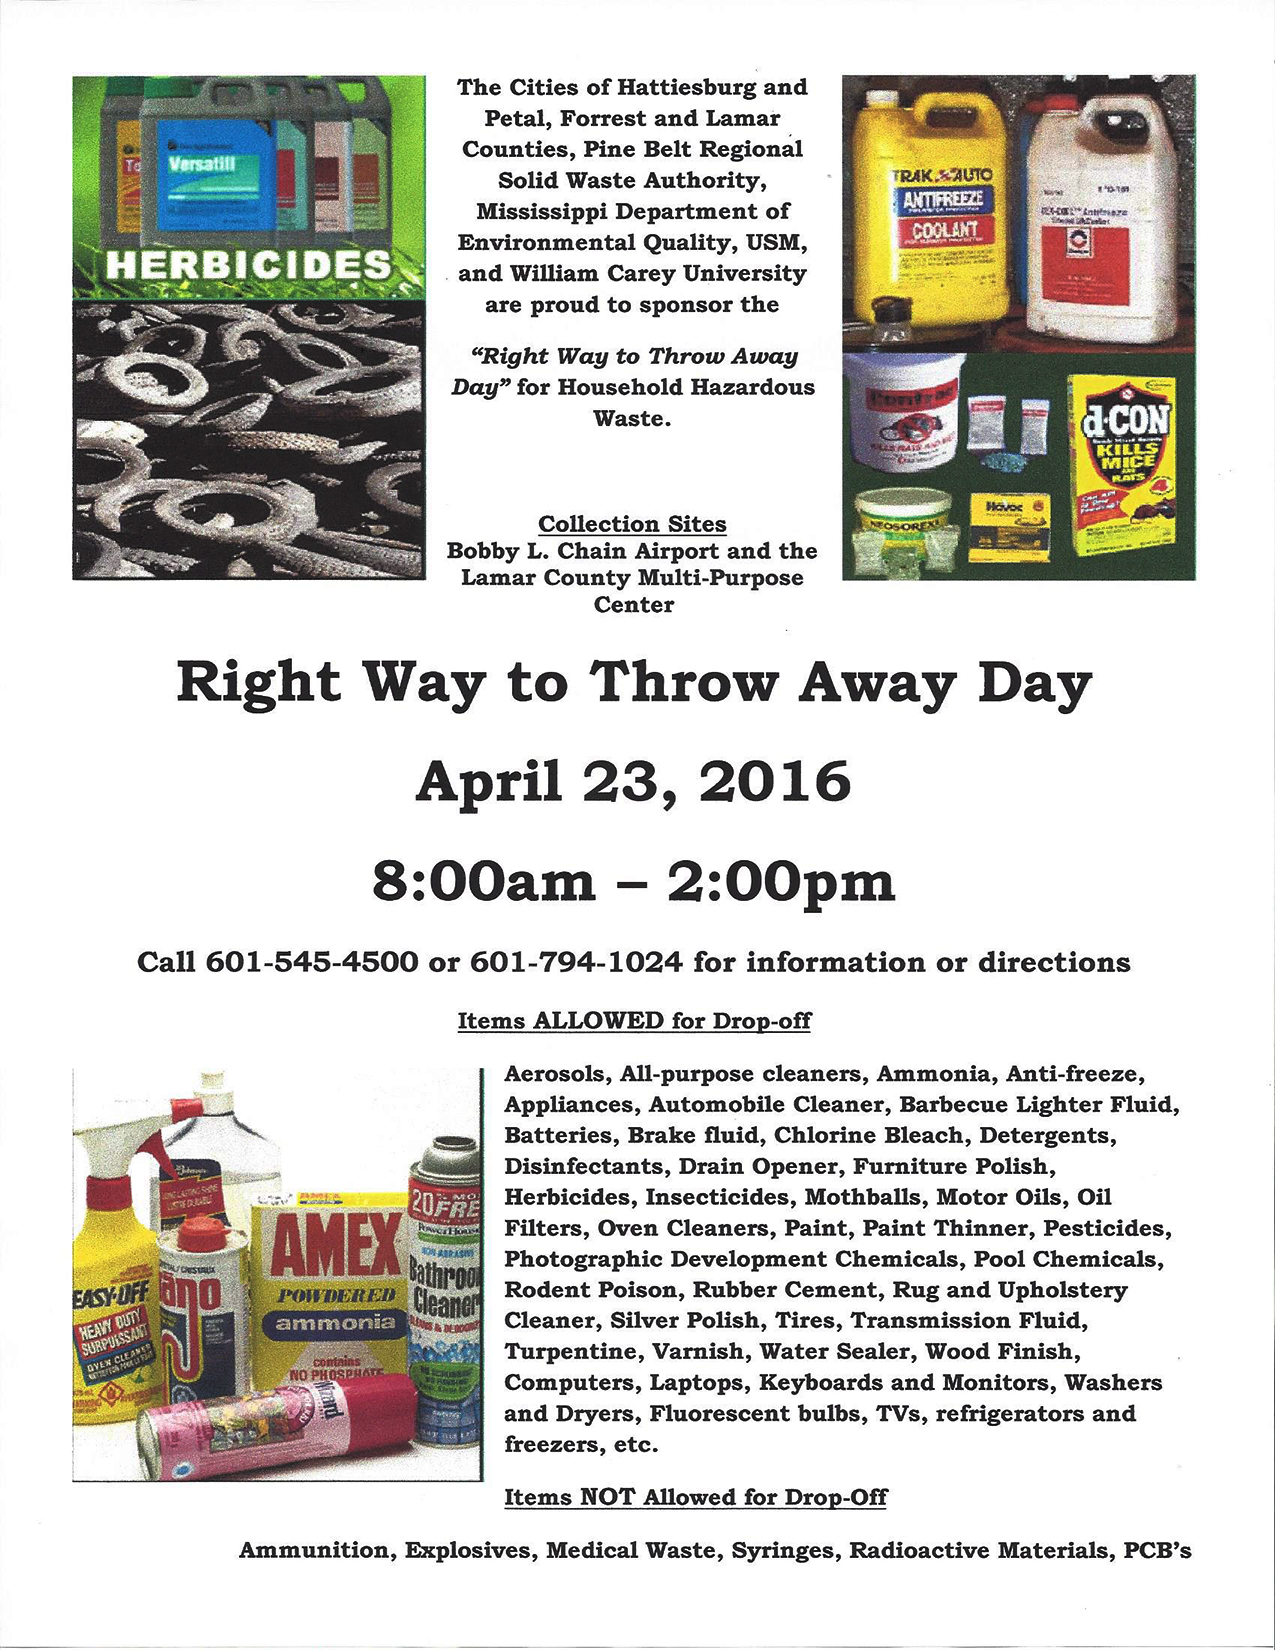 Right Way to Throw Away Day Flyer 2016